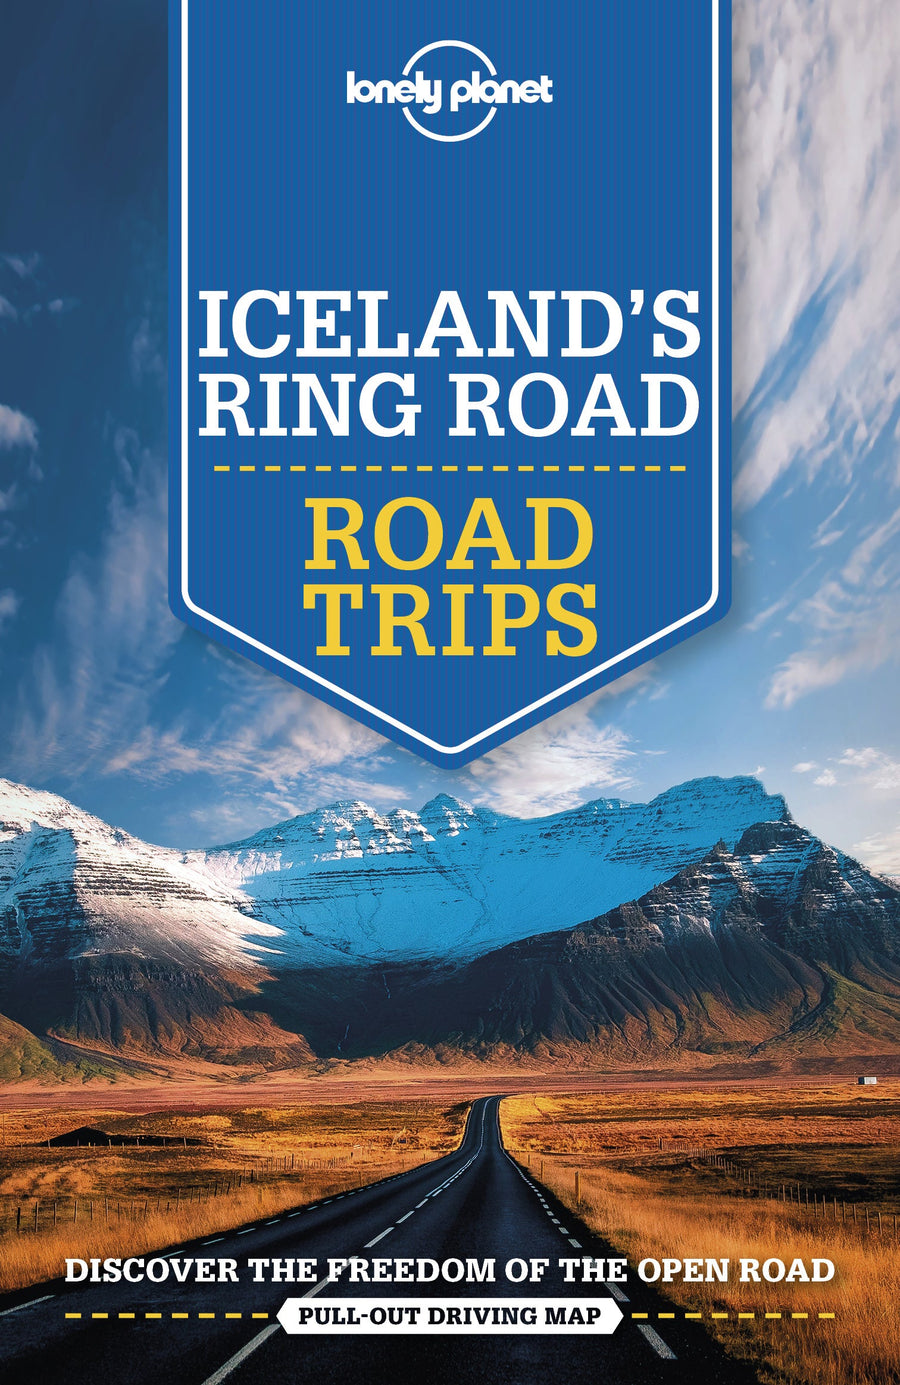 Road trip (en anglais) - Iceland's Ring Road | Lonely Planet guide de voyage Lonely Planet 